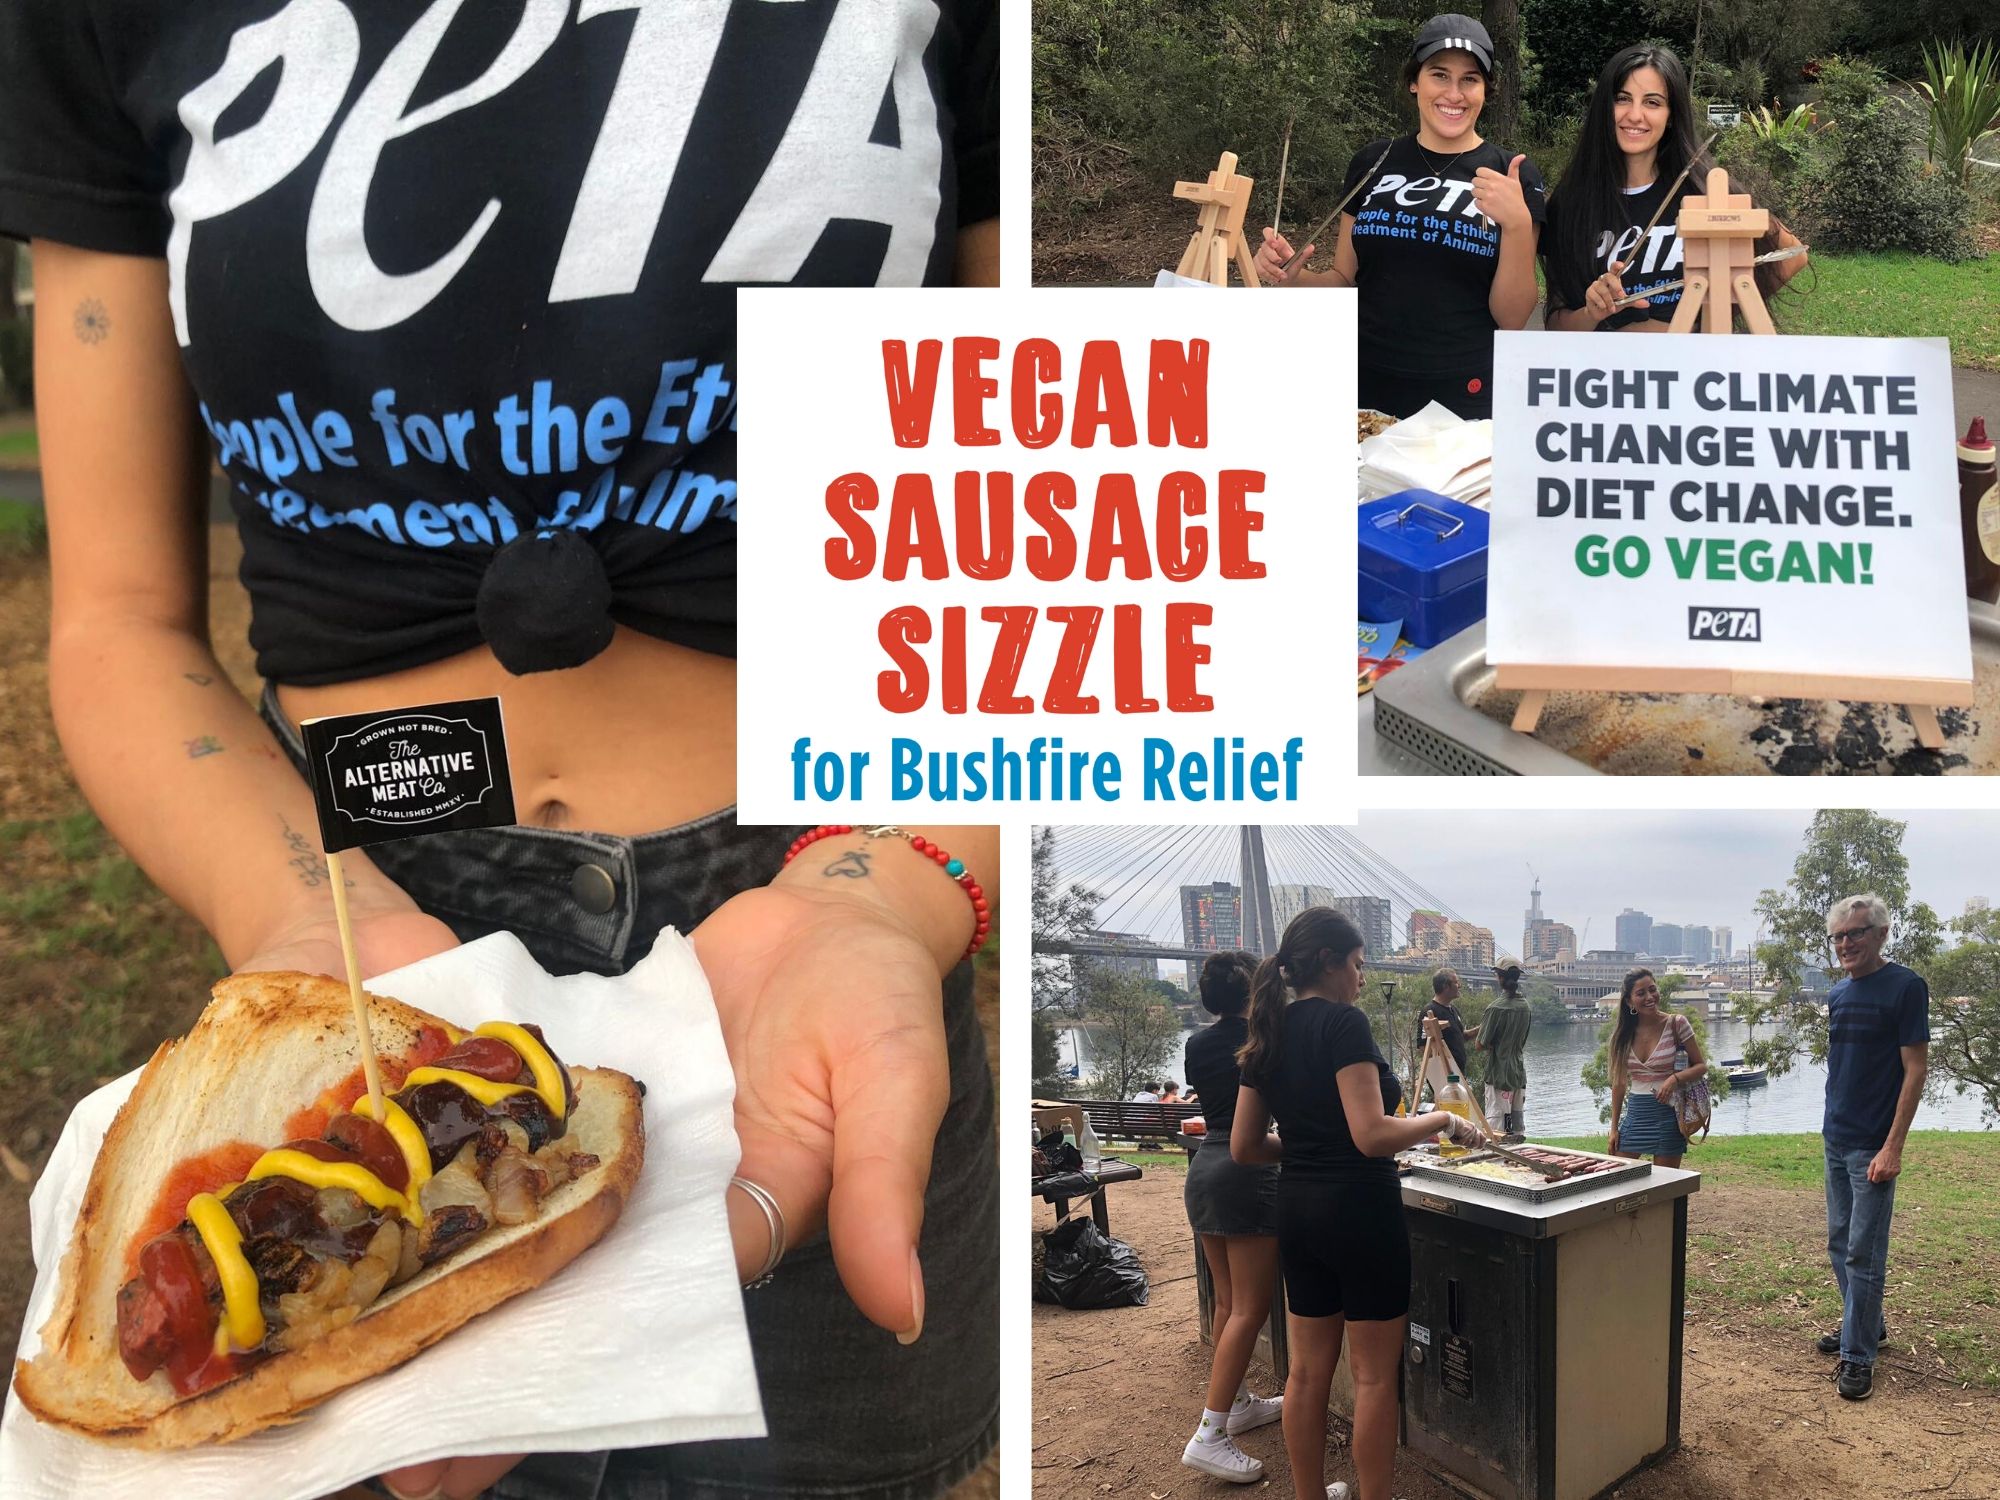 A photo collage from PETA's vegan sausage sizzle for the Australian bushfires